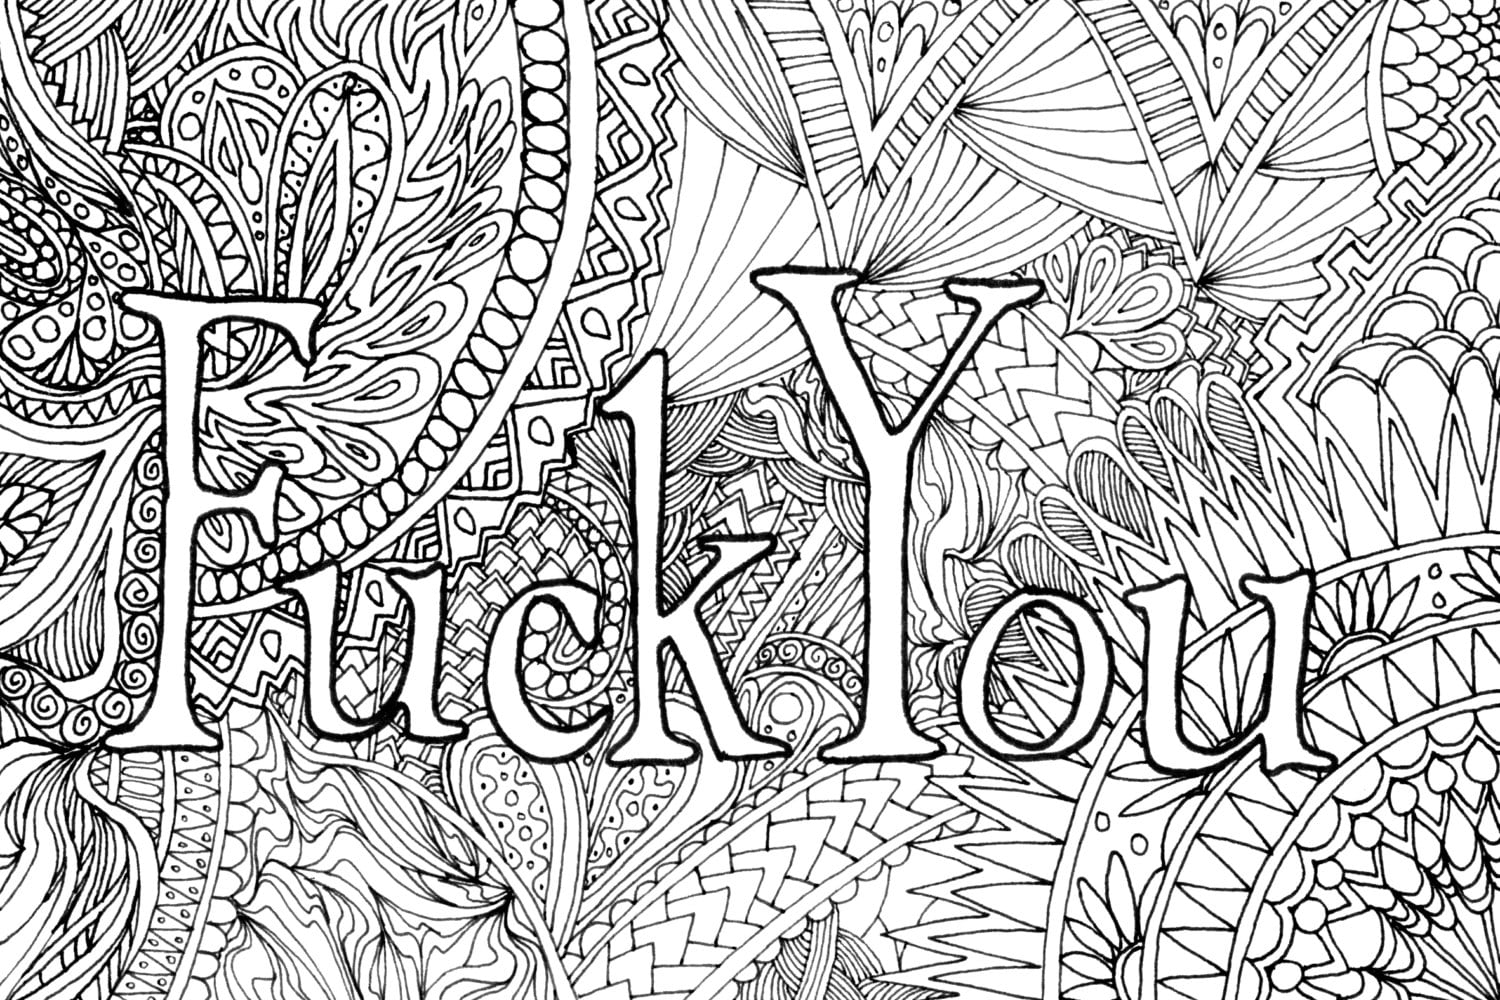 Free Printable Coloring Pages For Adults Only Swear Words - 179 best